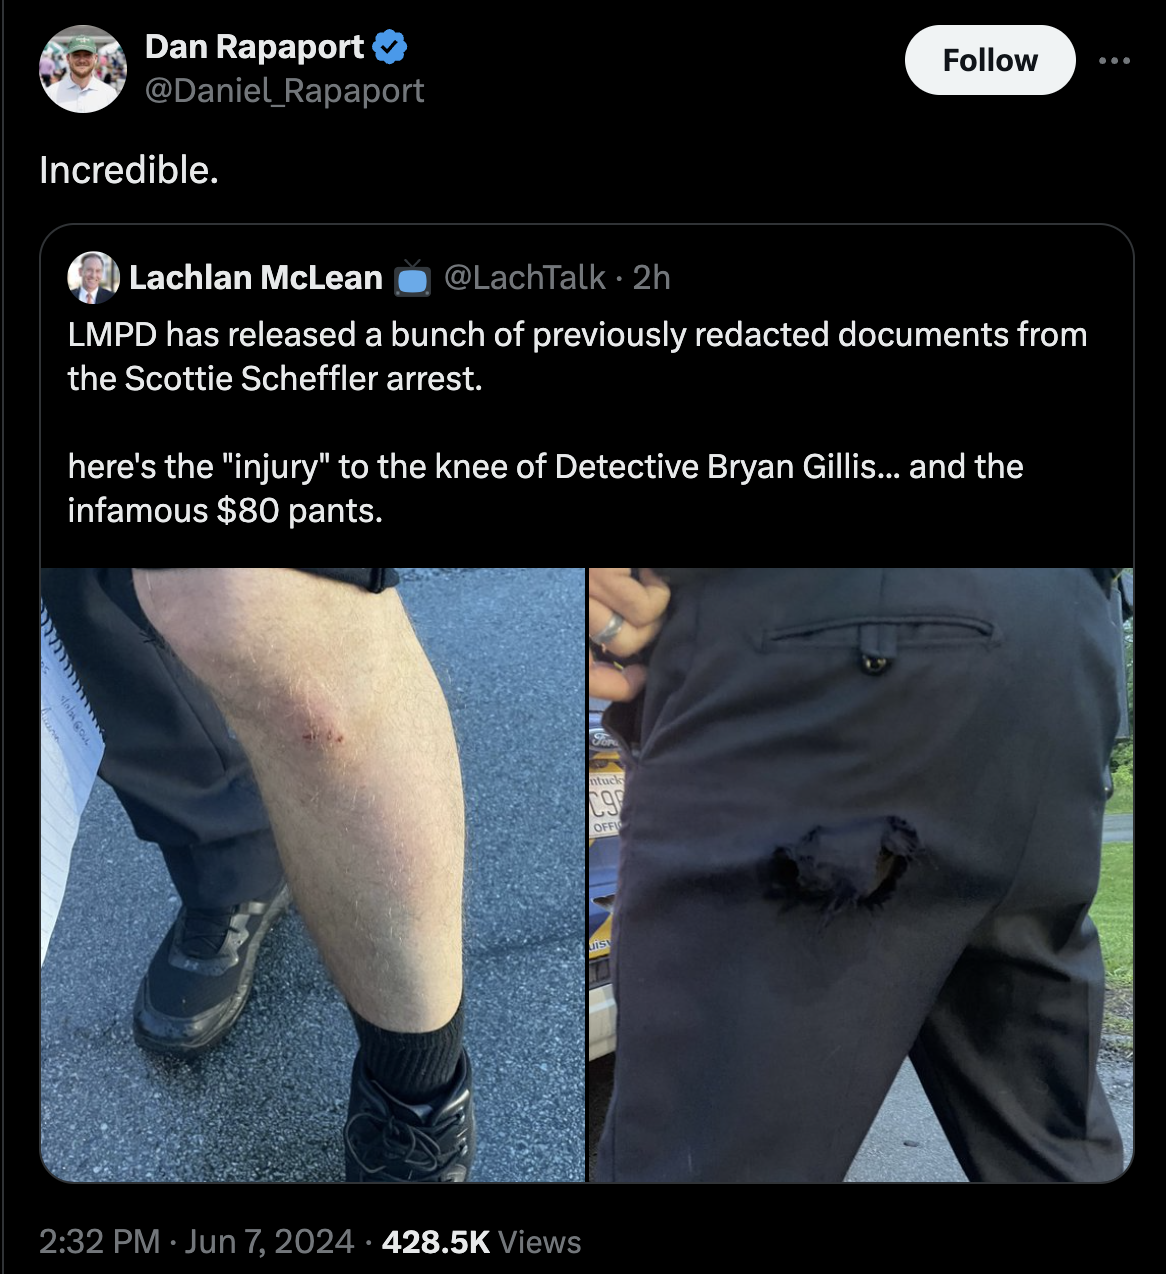 screenshot - Dan Rapaport Rapaport Incredible. Lachlan McLean . 2h Lmpd has released a bunch of previously redacted documents from the Scottie Scheffler arrest. here's the "injury" to the knee of Detective Bryan Gillis... and the infamous $80 pants. Views